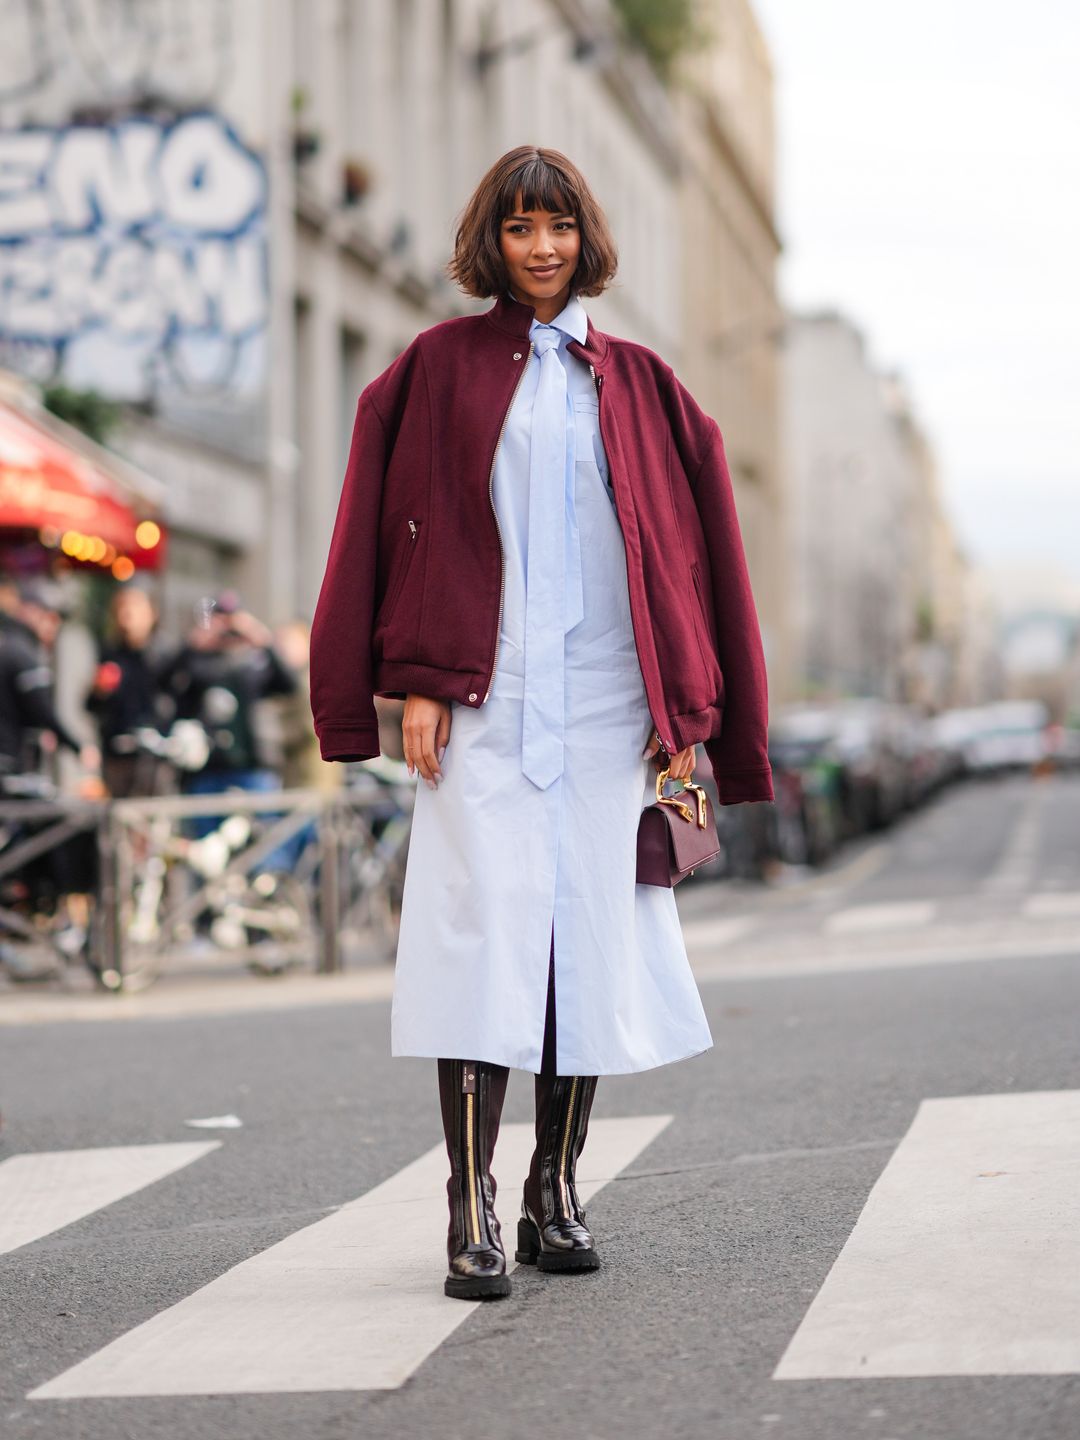 Flora Coquerel wears a burgundy oversized bomber jacket , a pastel pale blue long shirt / midi dress with a tie, a leather bag, knee-high leather boots, outside Casablanca